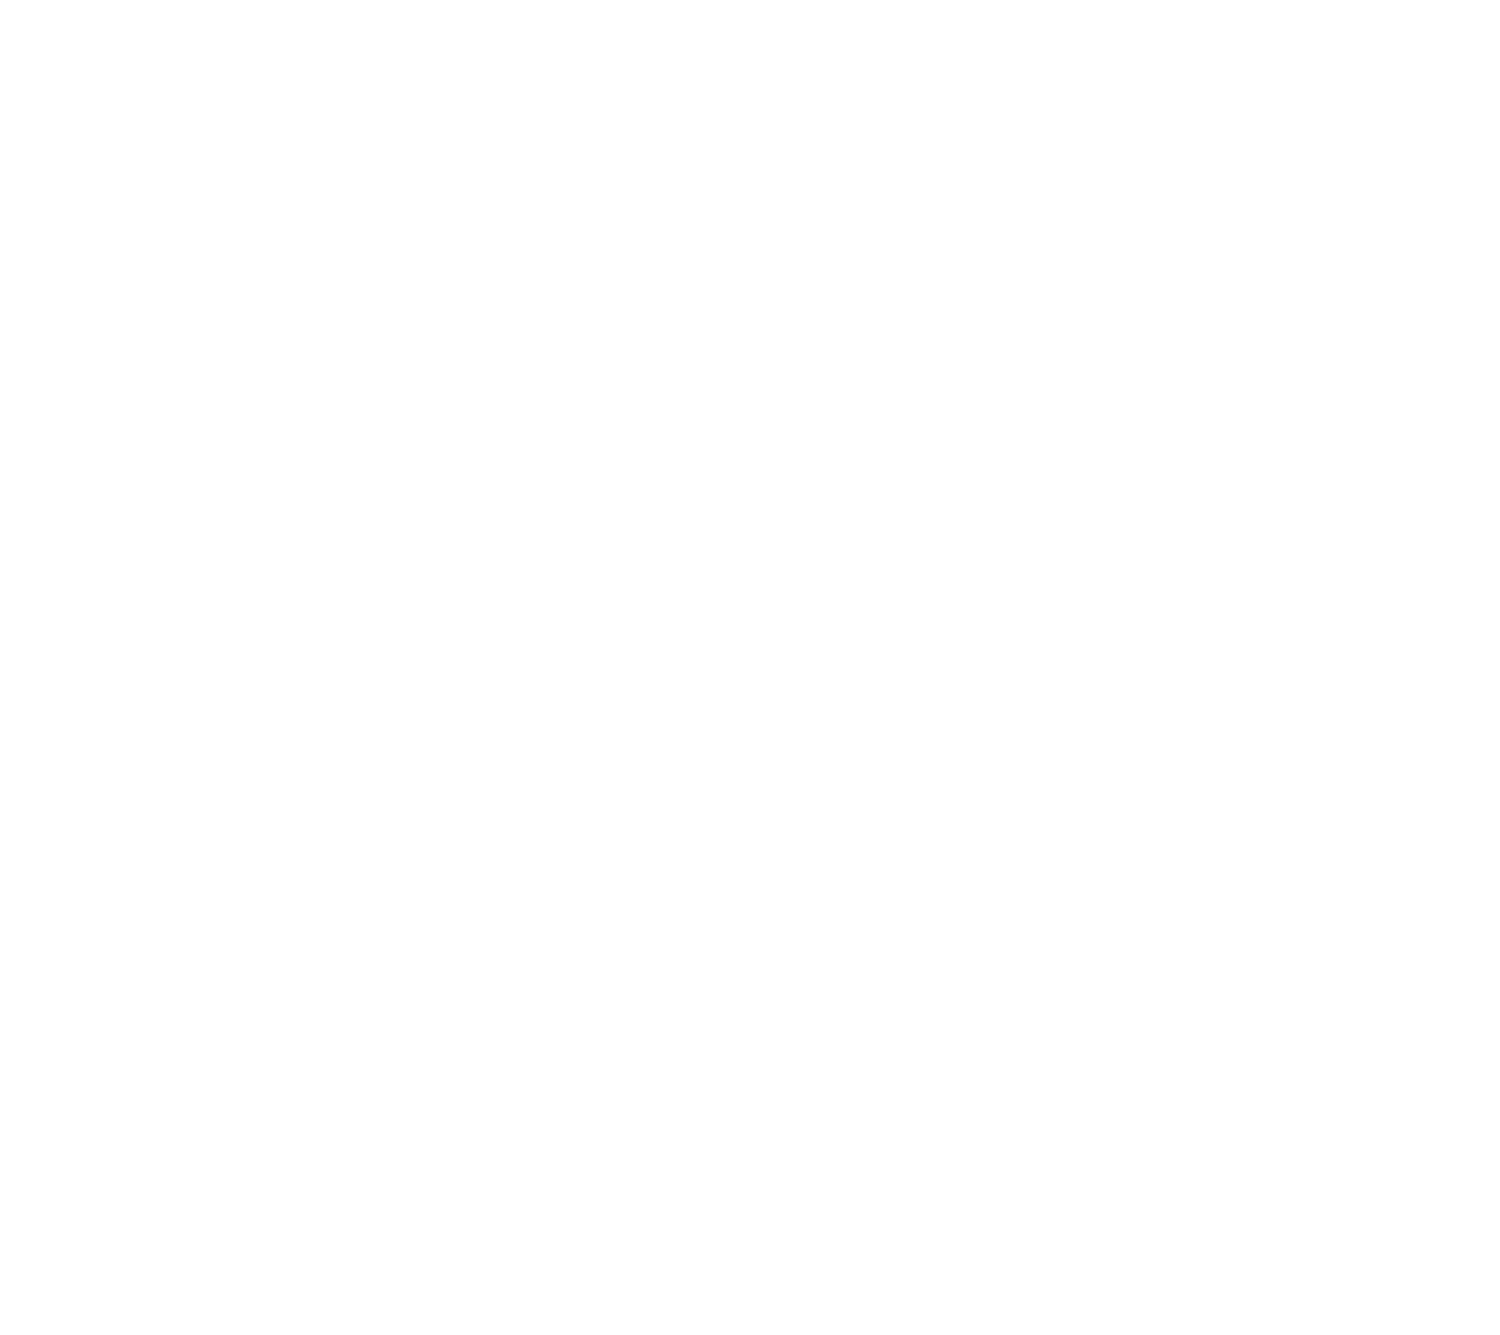 PGTSND Productions